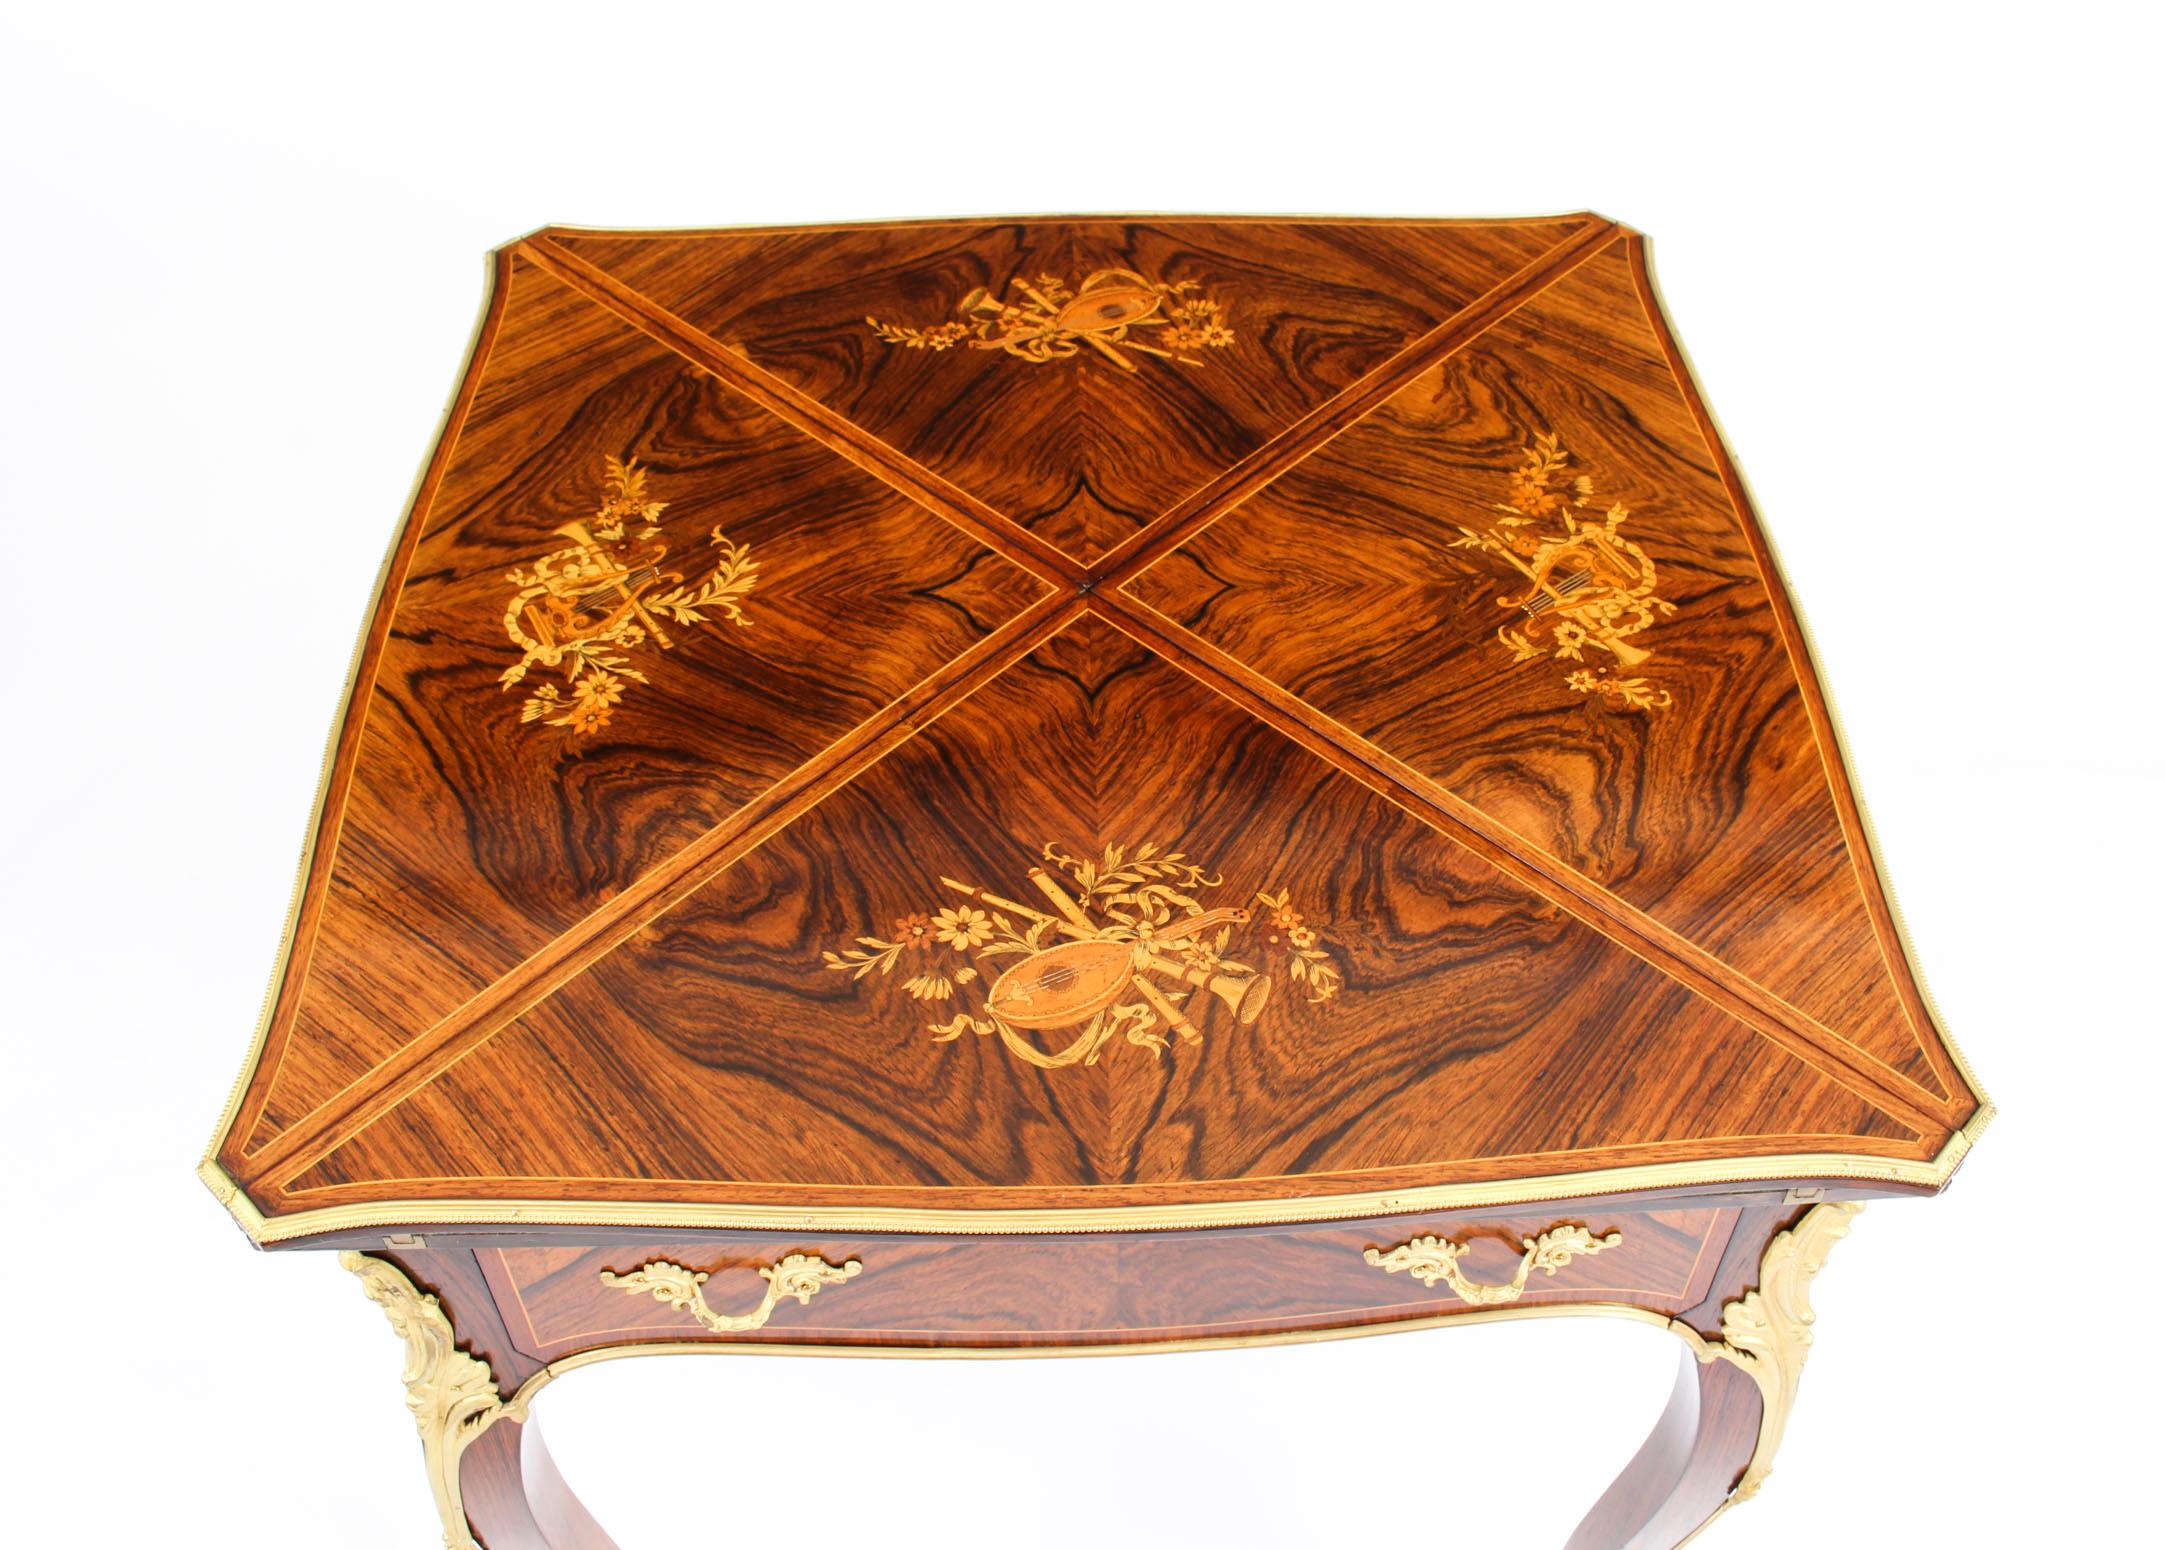 English Antique Victorian Ormolu Mounted Marquetry Envelope Card Table 19th Century For Sale